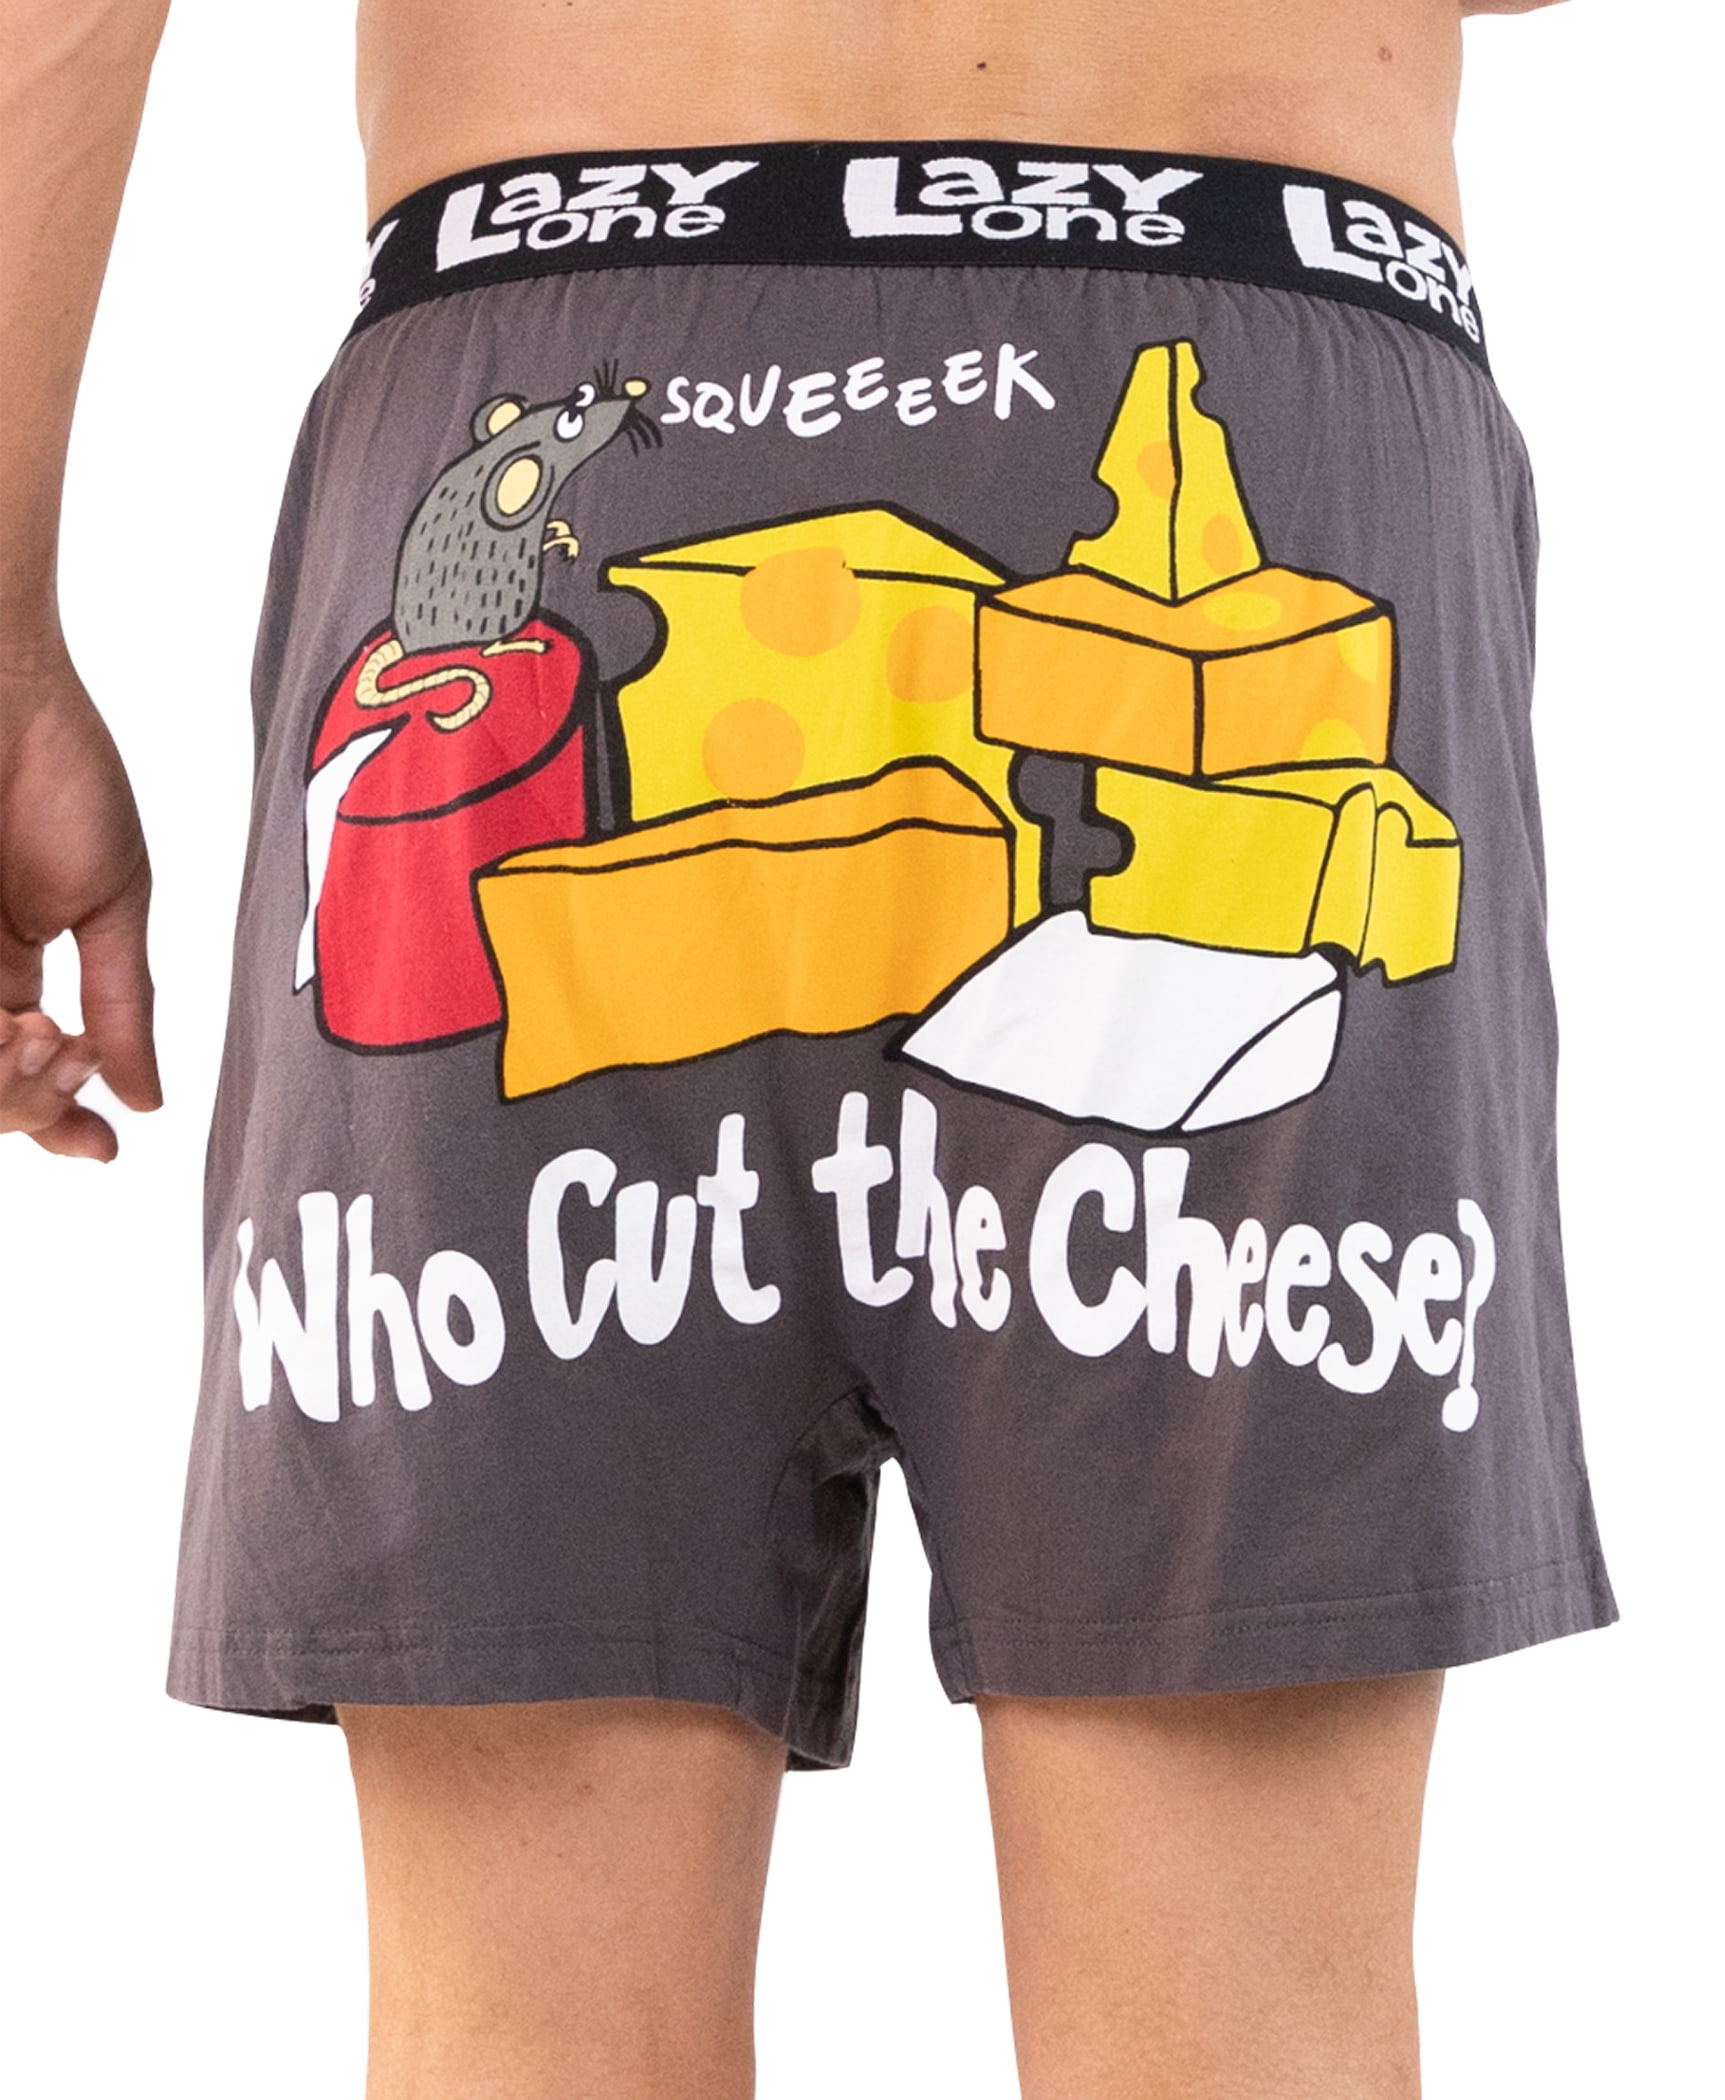 LazyOne Funny Animal Boxers, Pull My Finger, Humorous Underwear, Gag Gifts  for Men, Xxlarge 